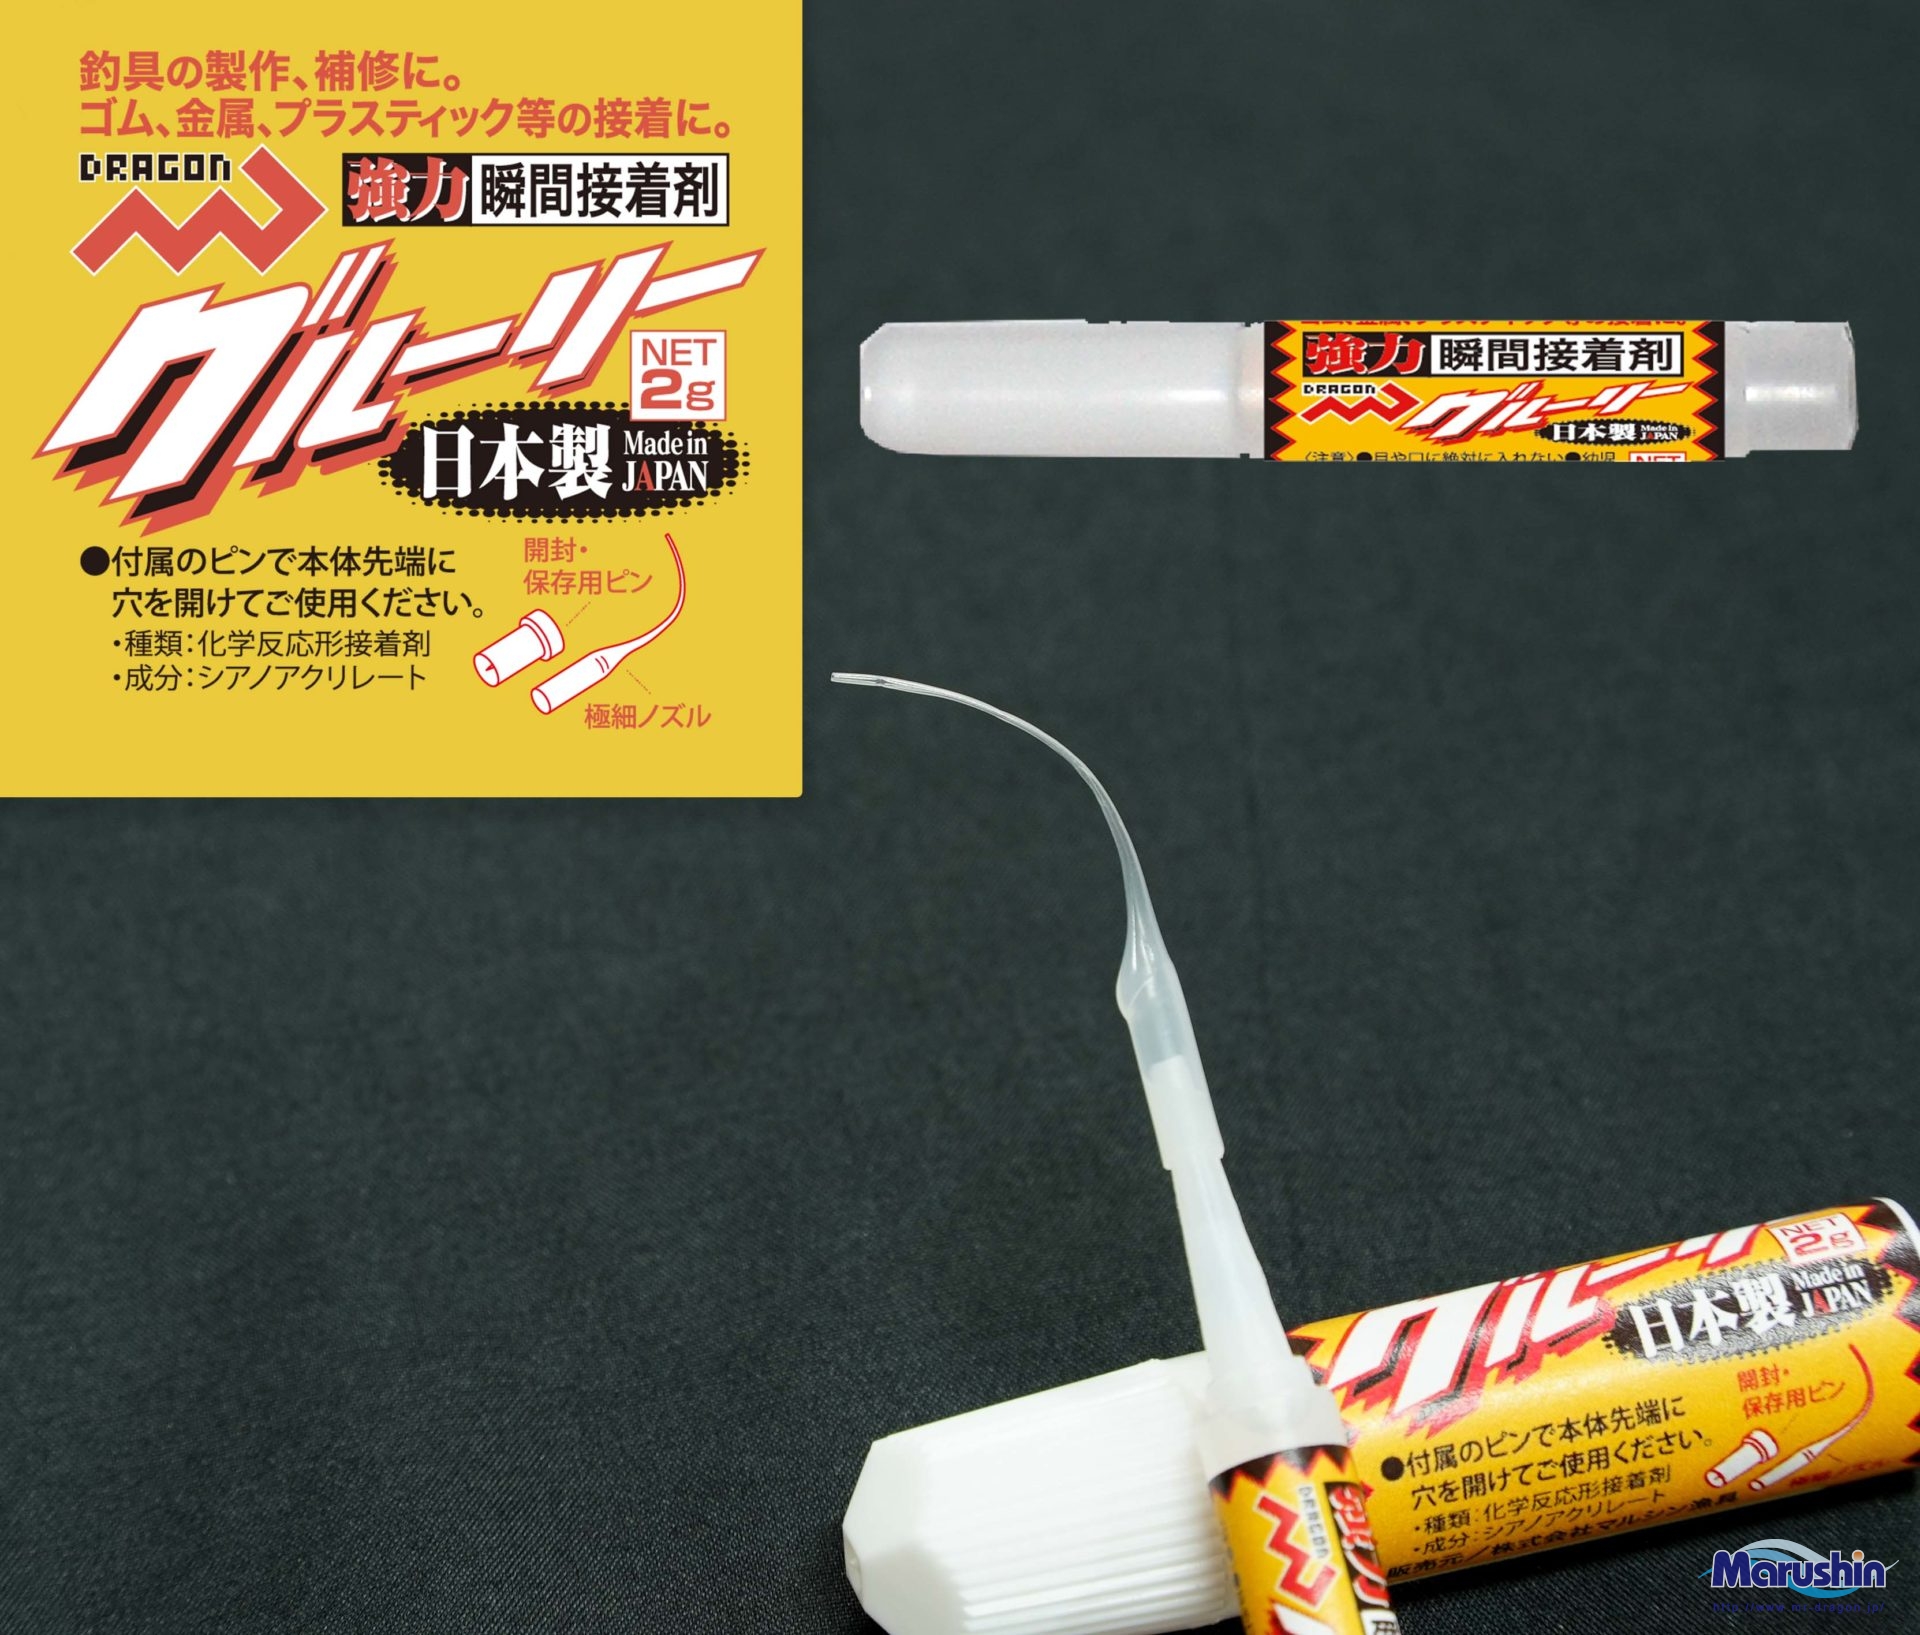 Strong Instant Adhesive Gluely 2g * Scheduled to be released in late March (Made in Japan) Image image